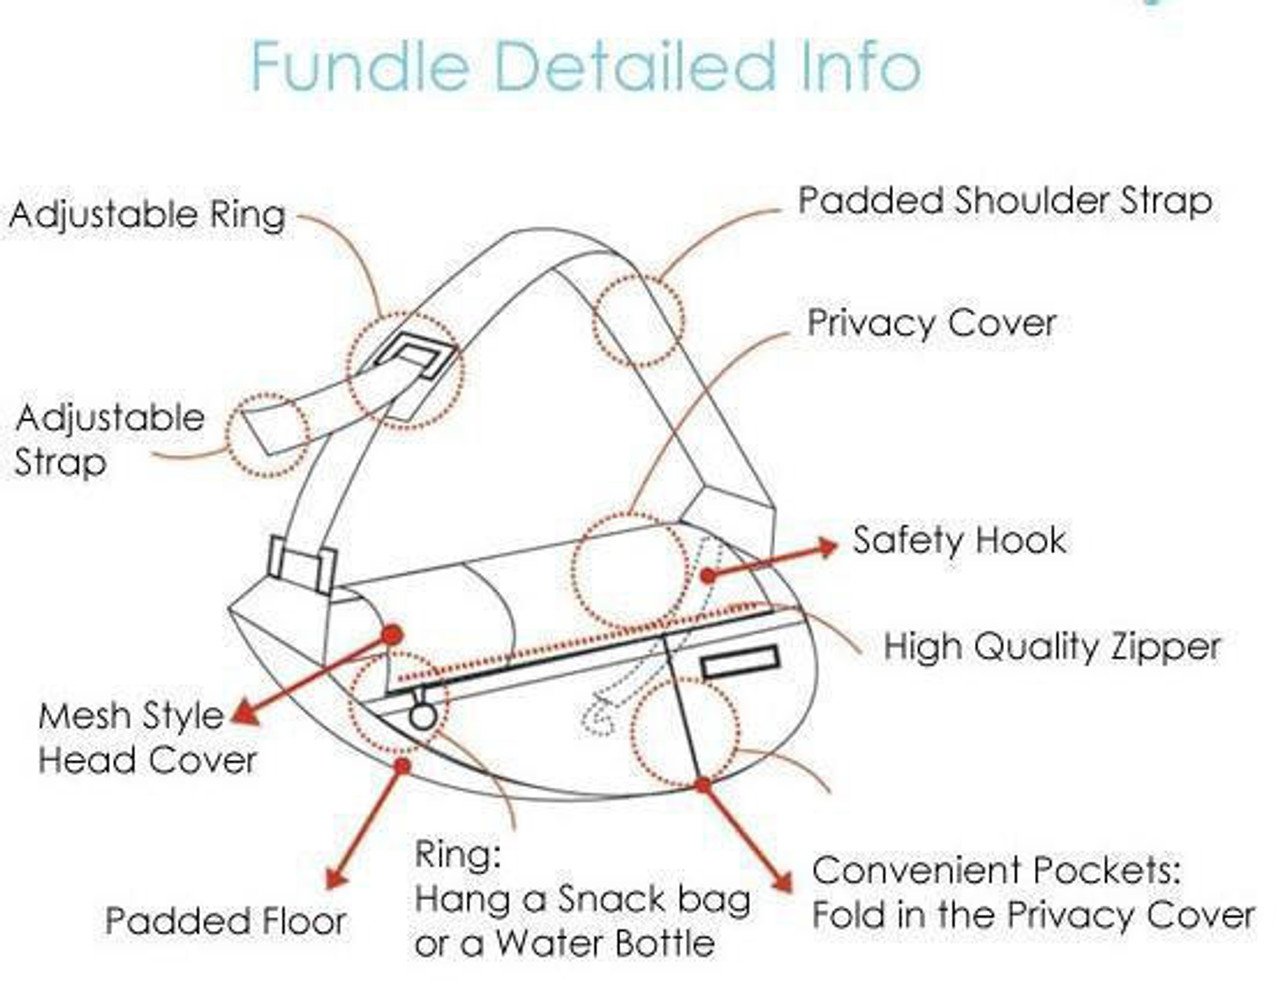 Fundle NEW 3D Air Mesh Fundle Pet-Sling with detachable card wallet 